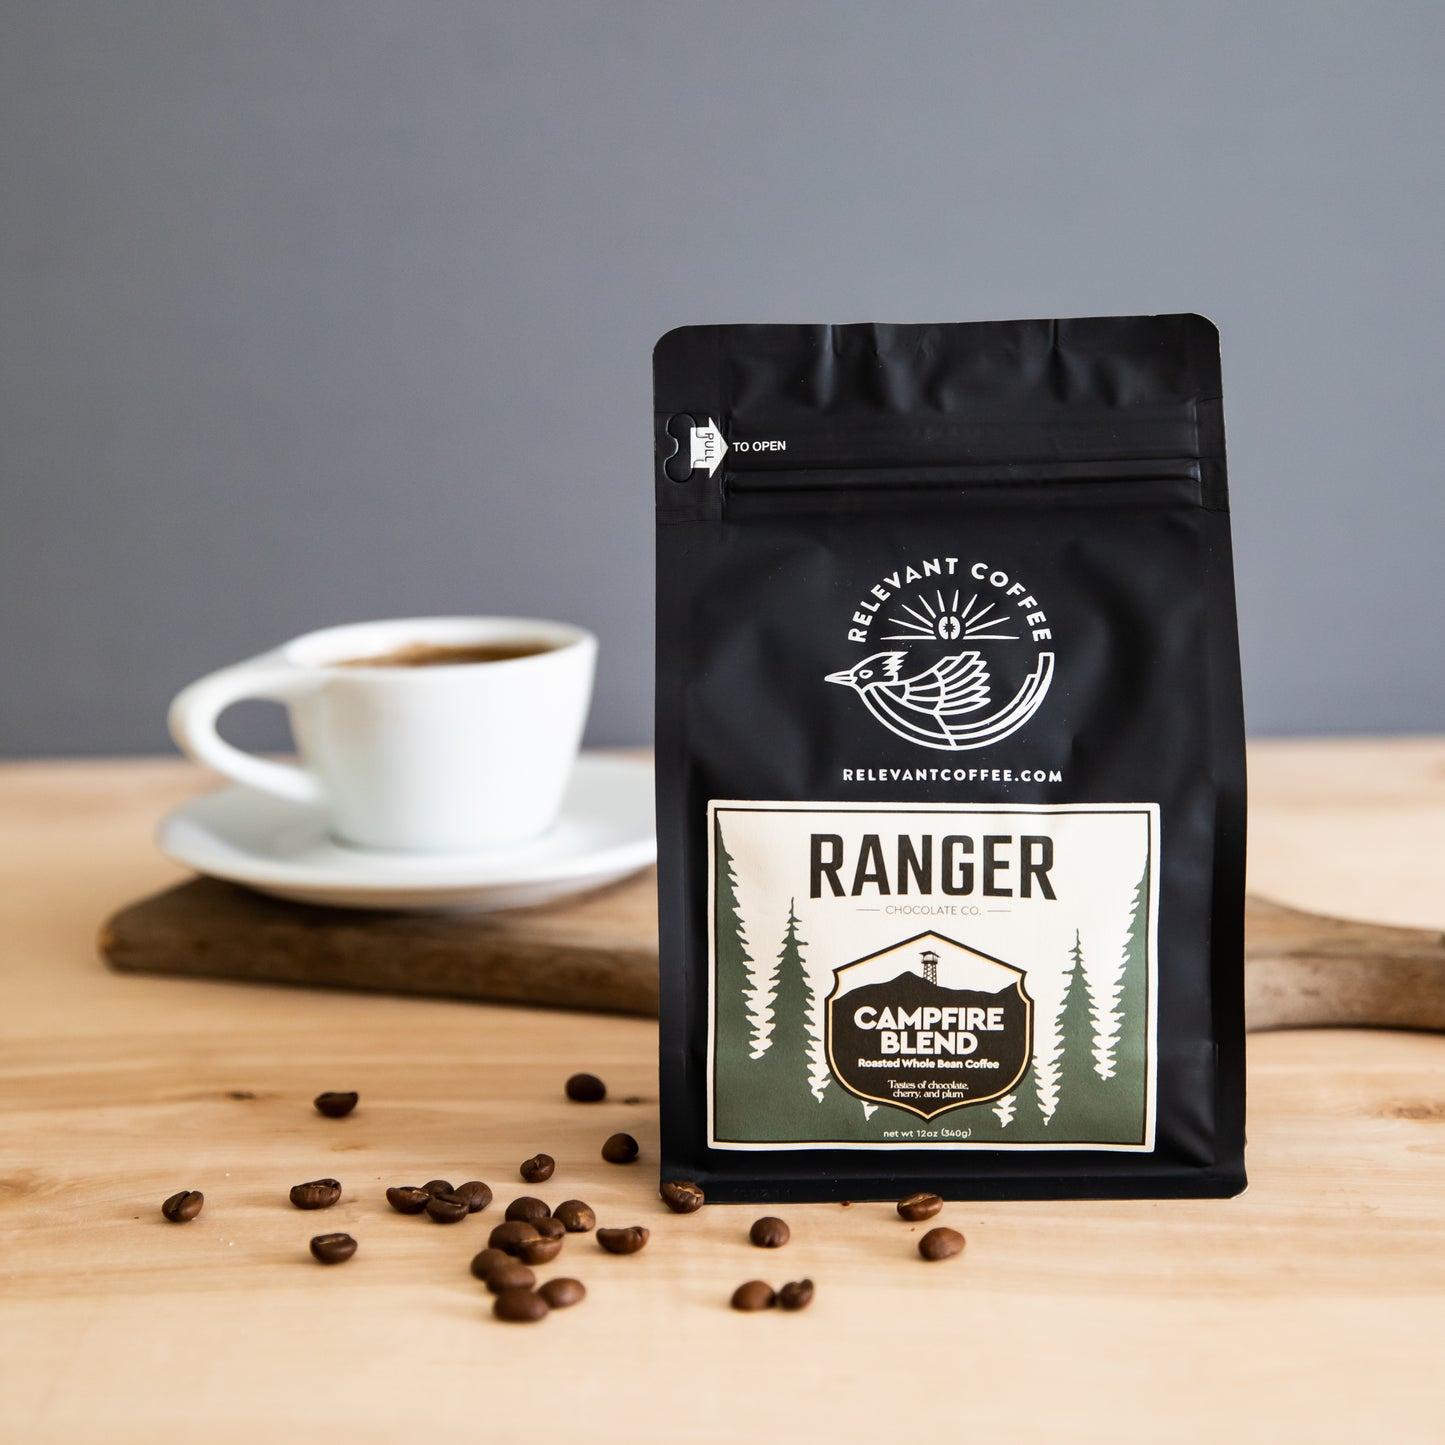 Ranger Campfire Blend, Roasted Whole Bean Coffee